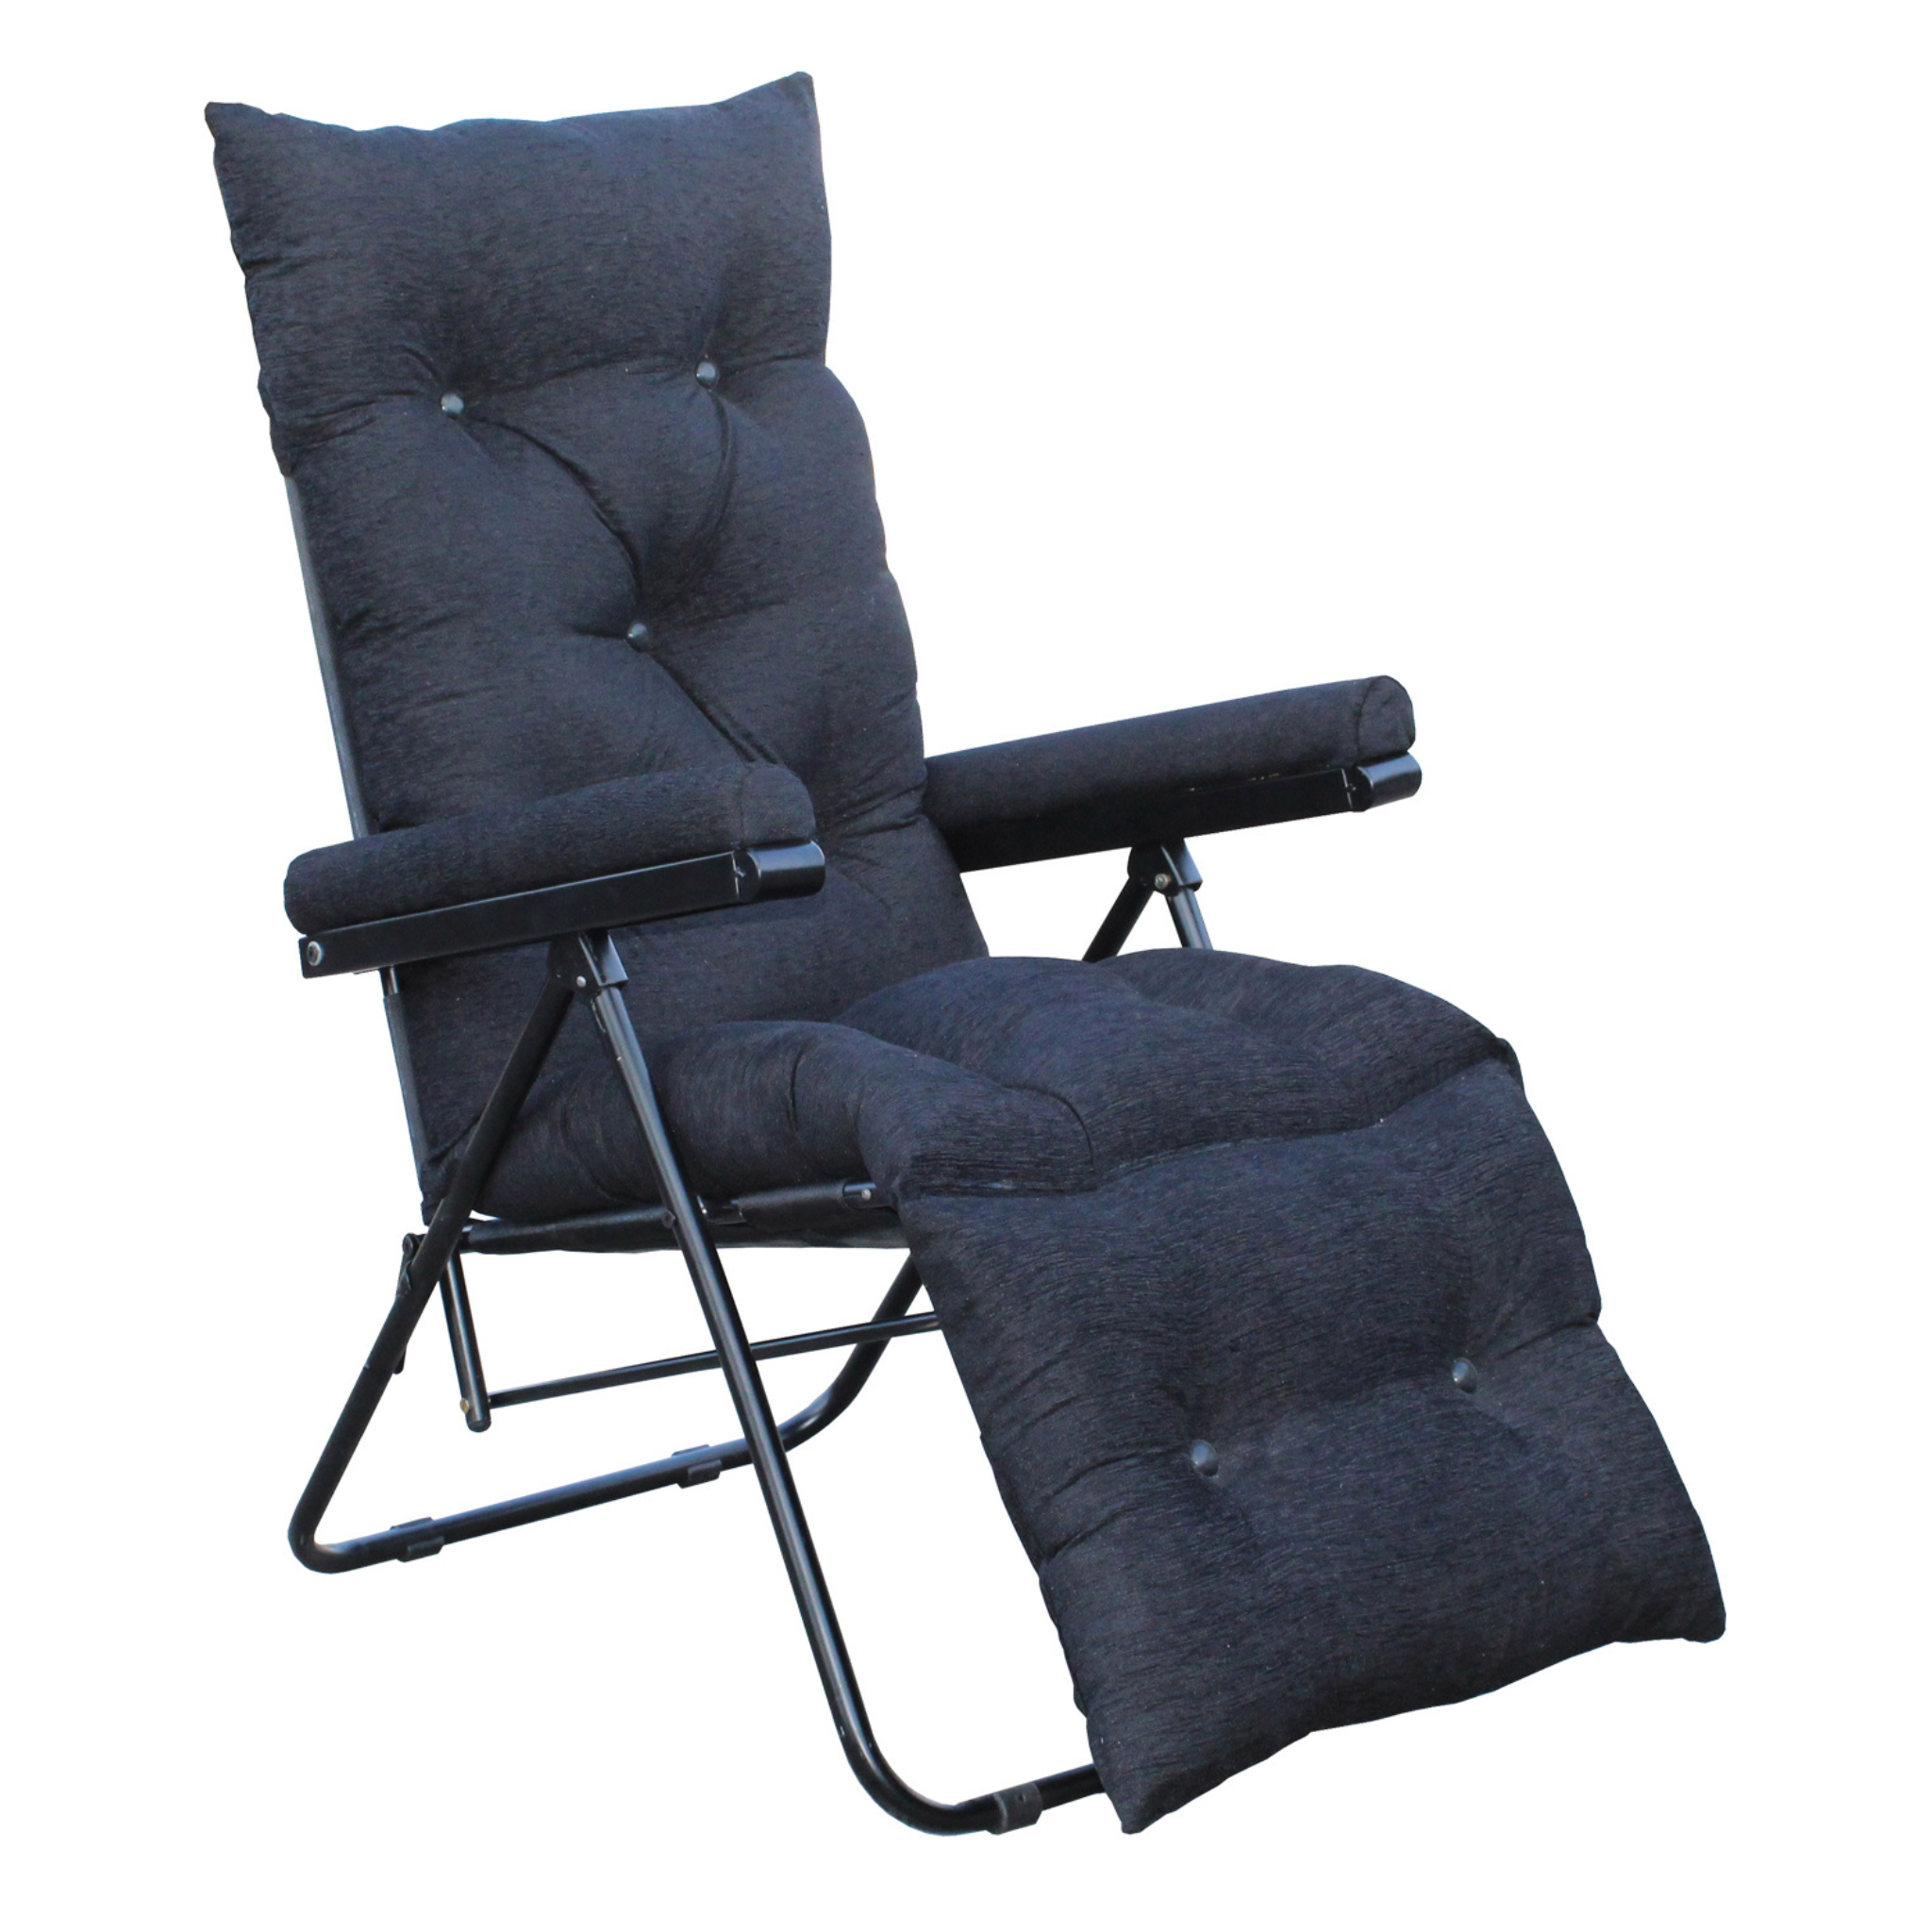 Pulsar 5 Stage Reclining Lazy Easy Chair with Recon Foam